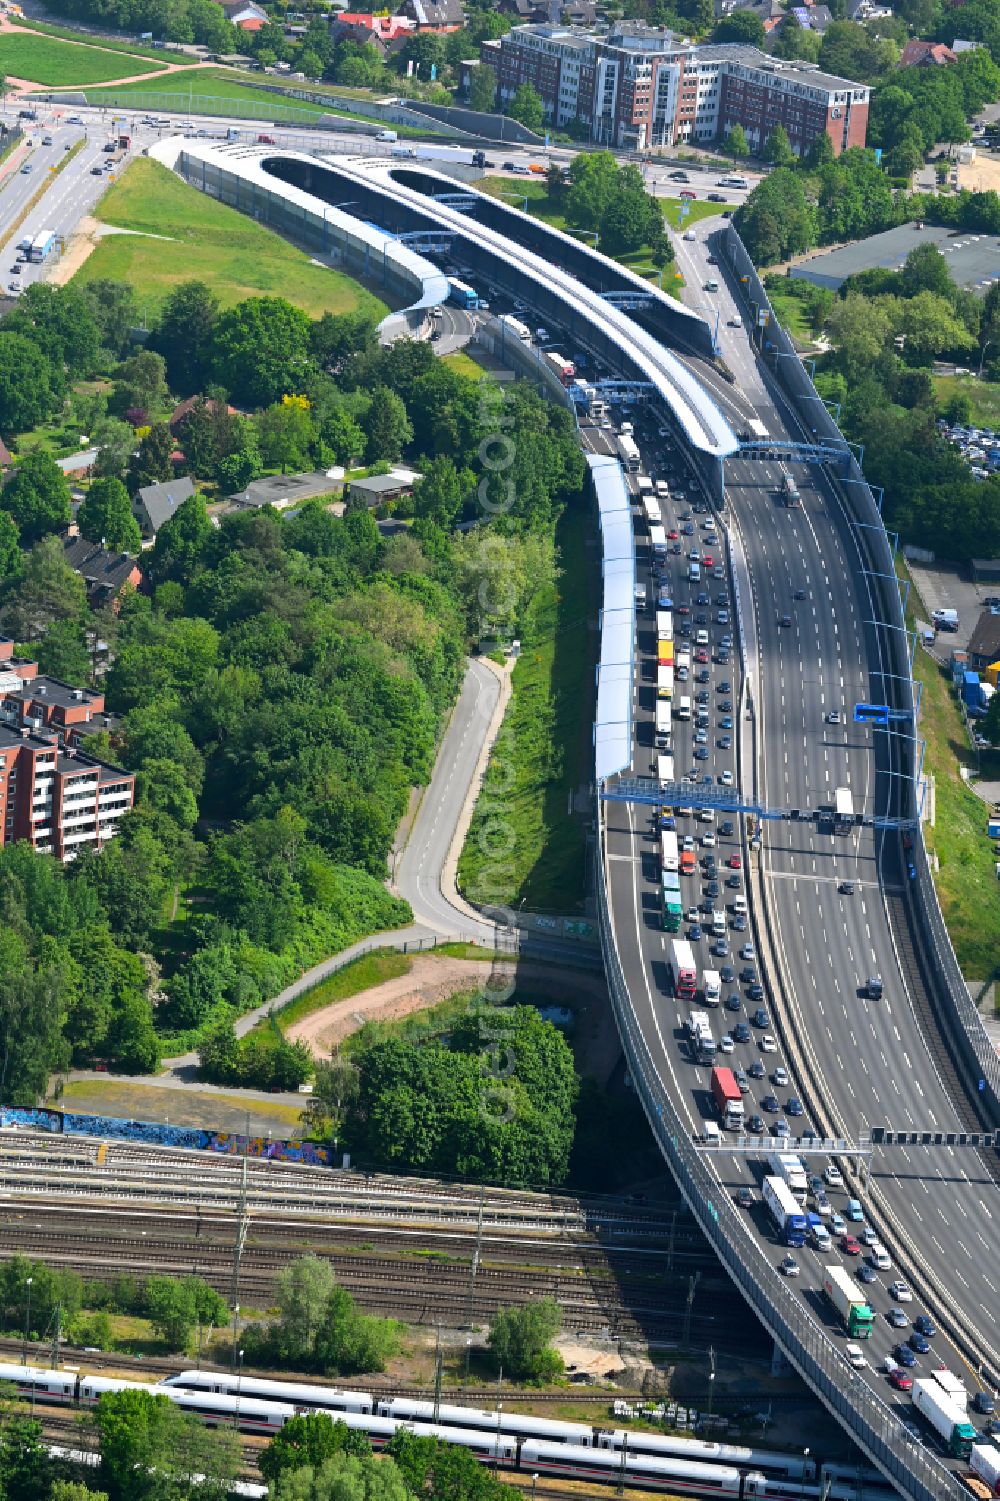 Hamburg from above - Construction site for the new route in the course of the motorway tunnel construction of the BAB A7 Hamburger Deckel or here Bahrenfelder Deckel in the district of Bahrenfeld in Hamburg, Germany